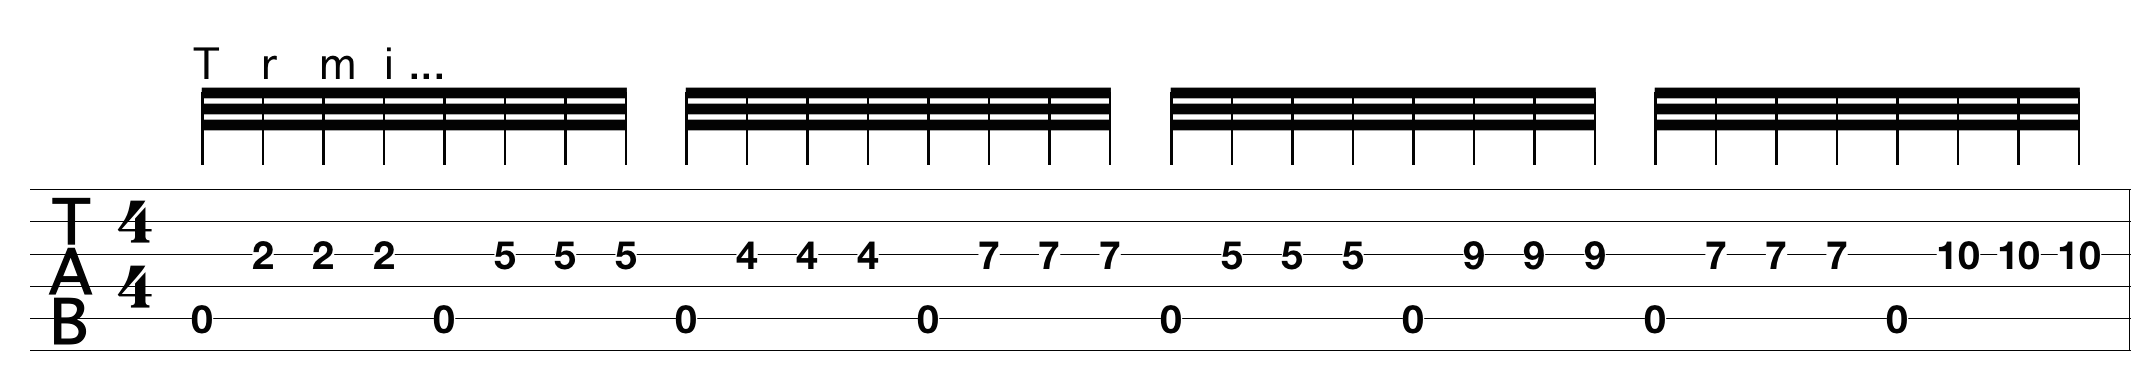 classical-guitar-practice-routine_1.png